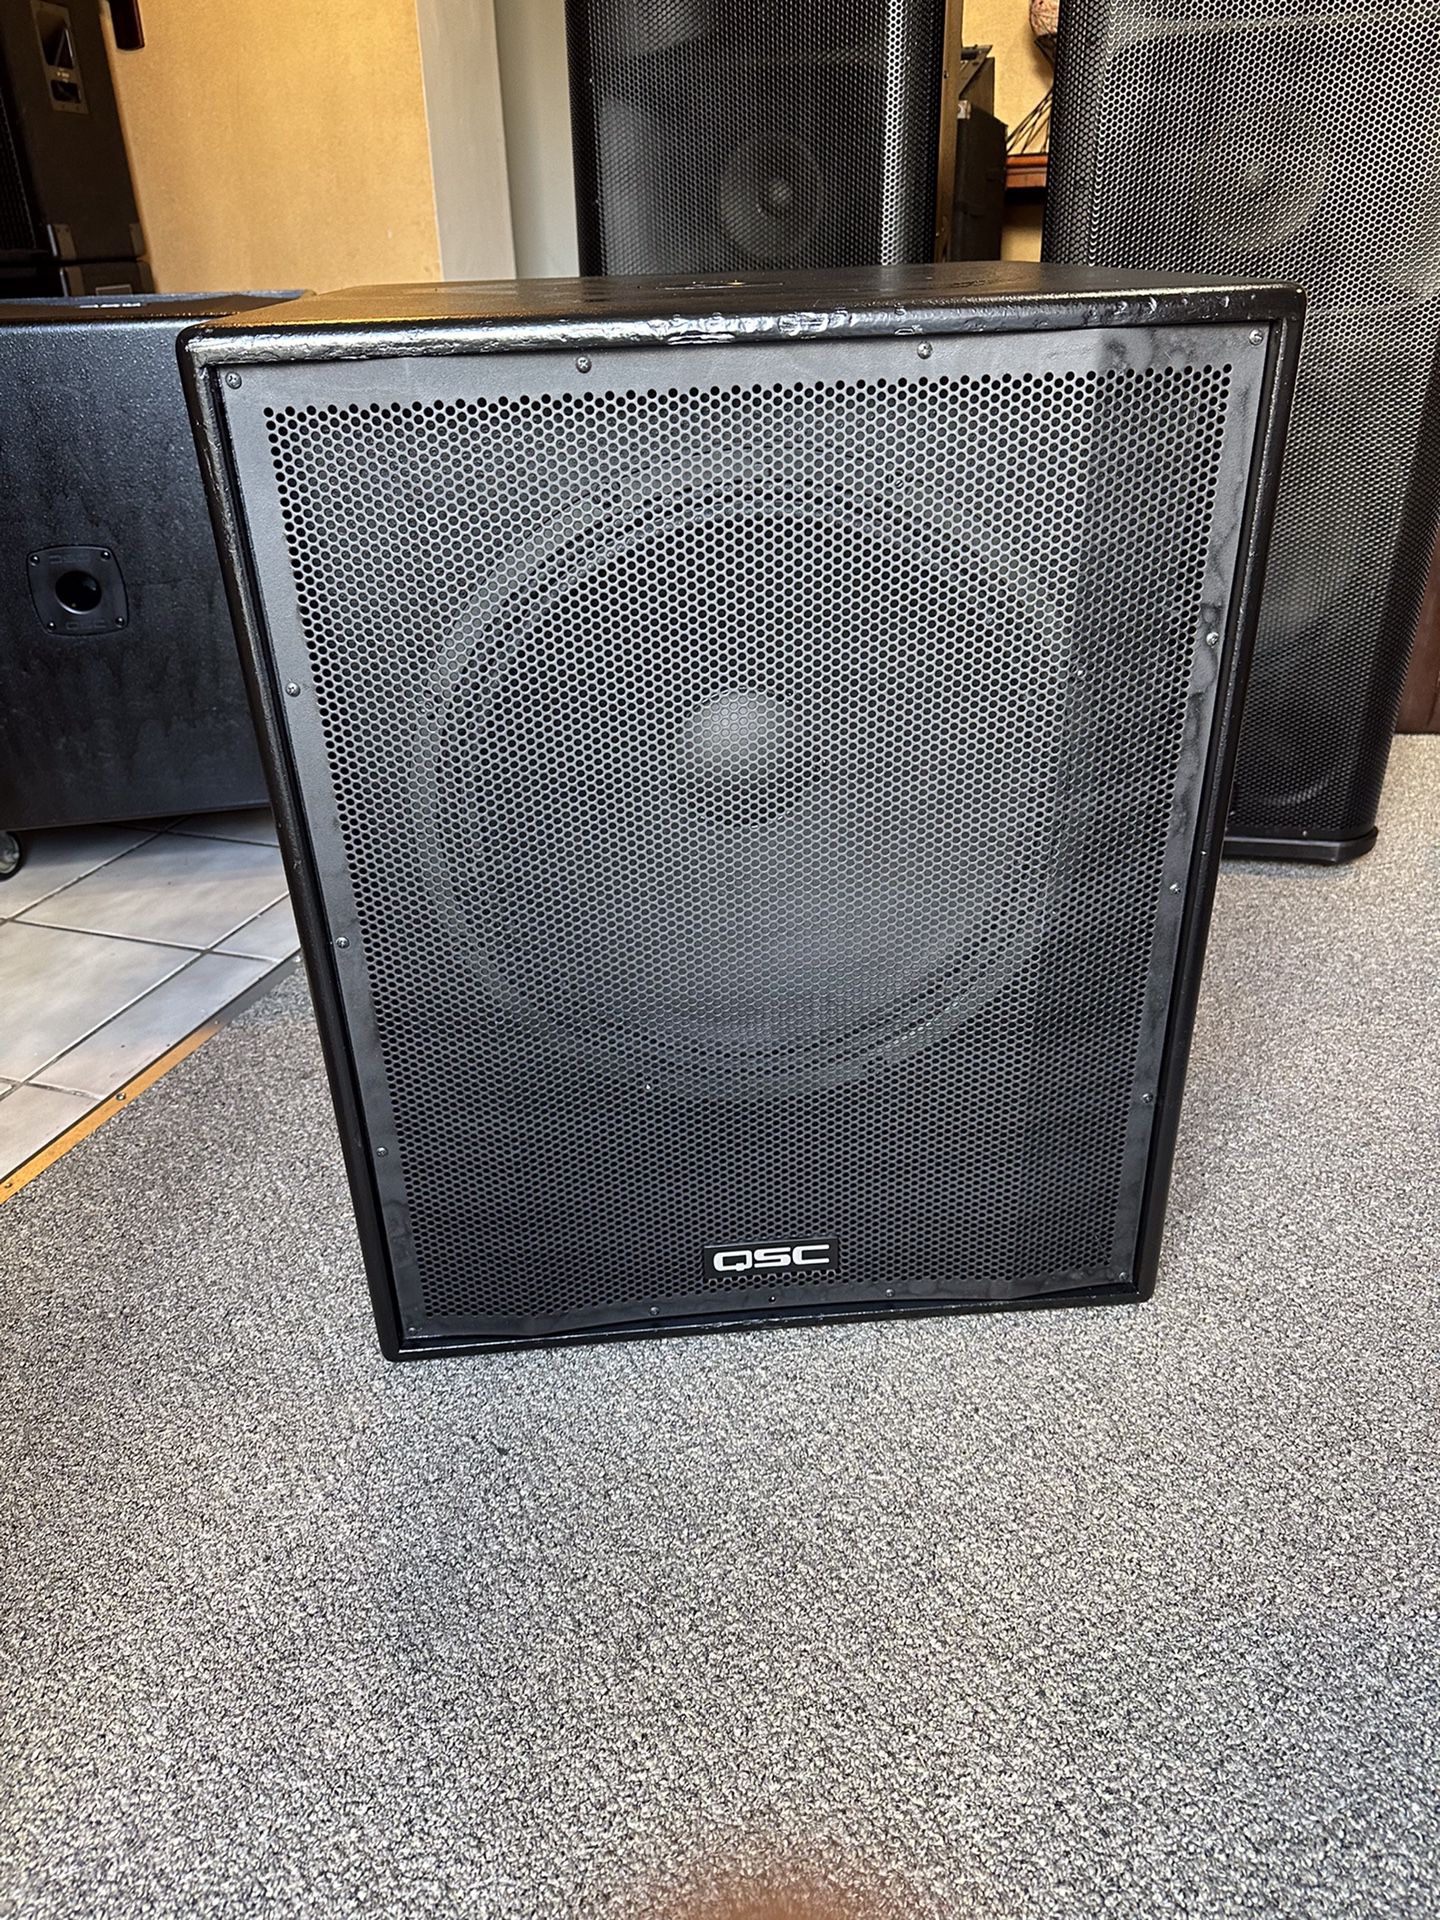 QSC HPR 181W Subwoofer-1000watts - In Great Condition 